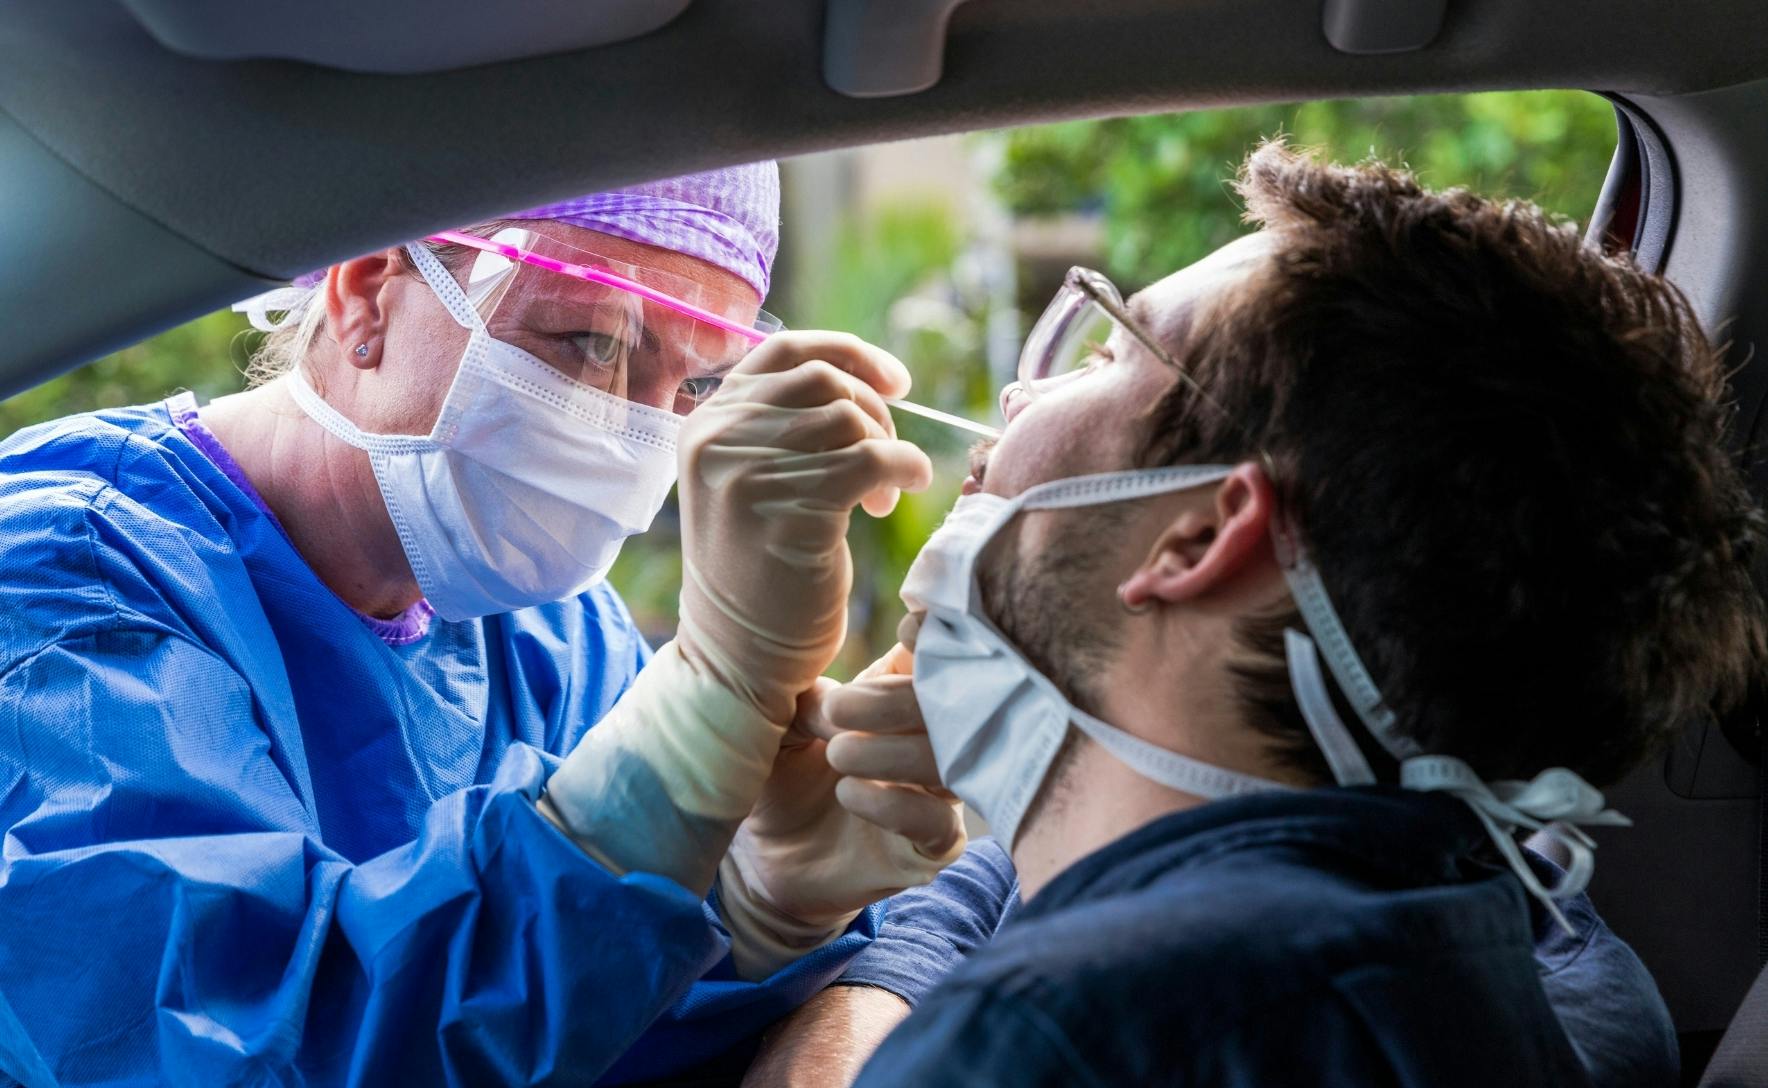 A female health worker wearing blue scrubs, a white mask and eye protection, leans through a car window to swab a man sitting in a front seat.